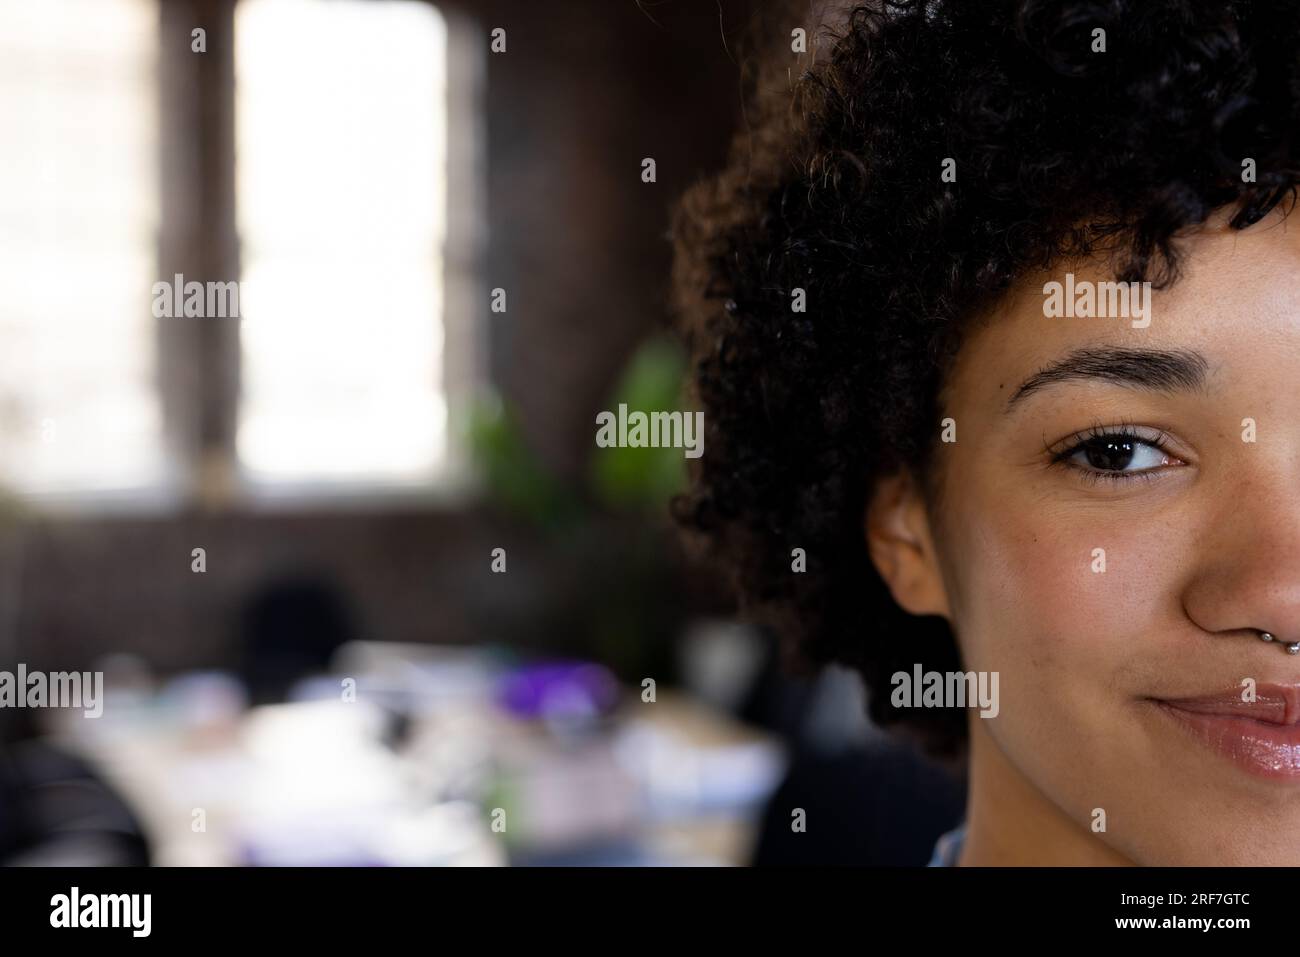 Half face portrait of a biracial woman smiling at office with copy space Stock Photo